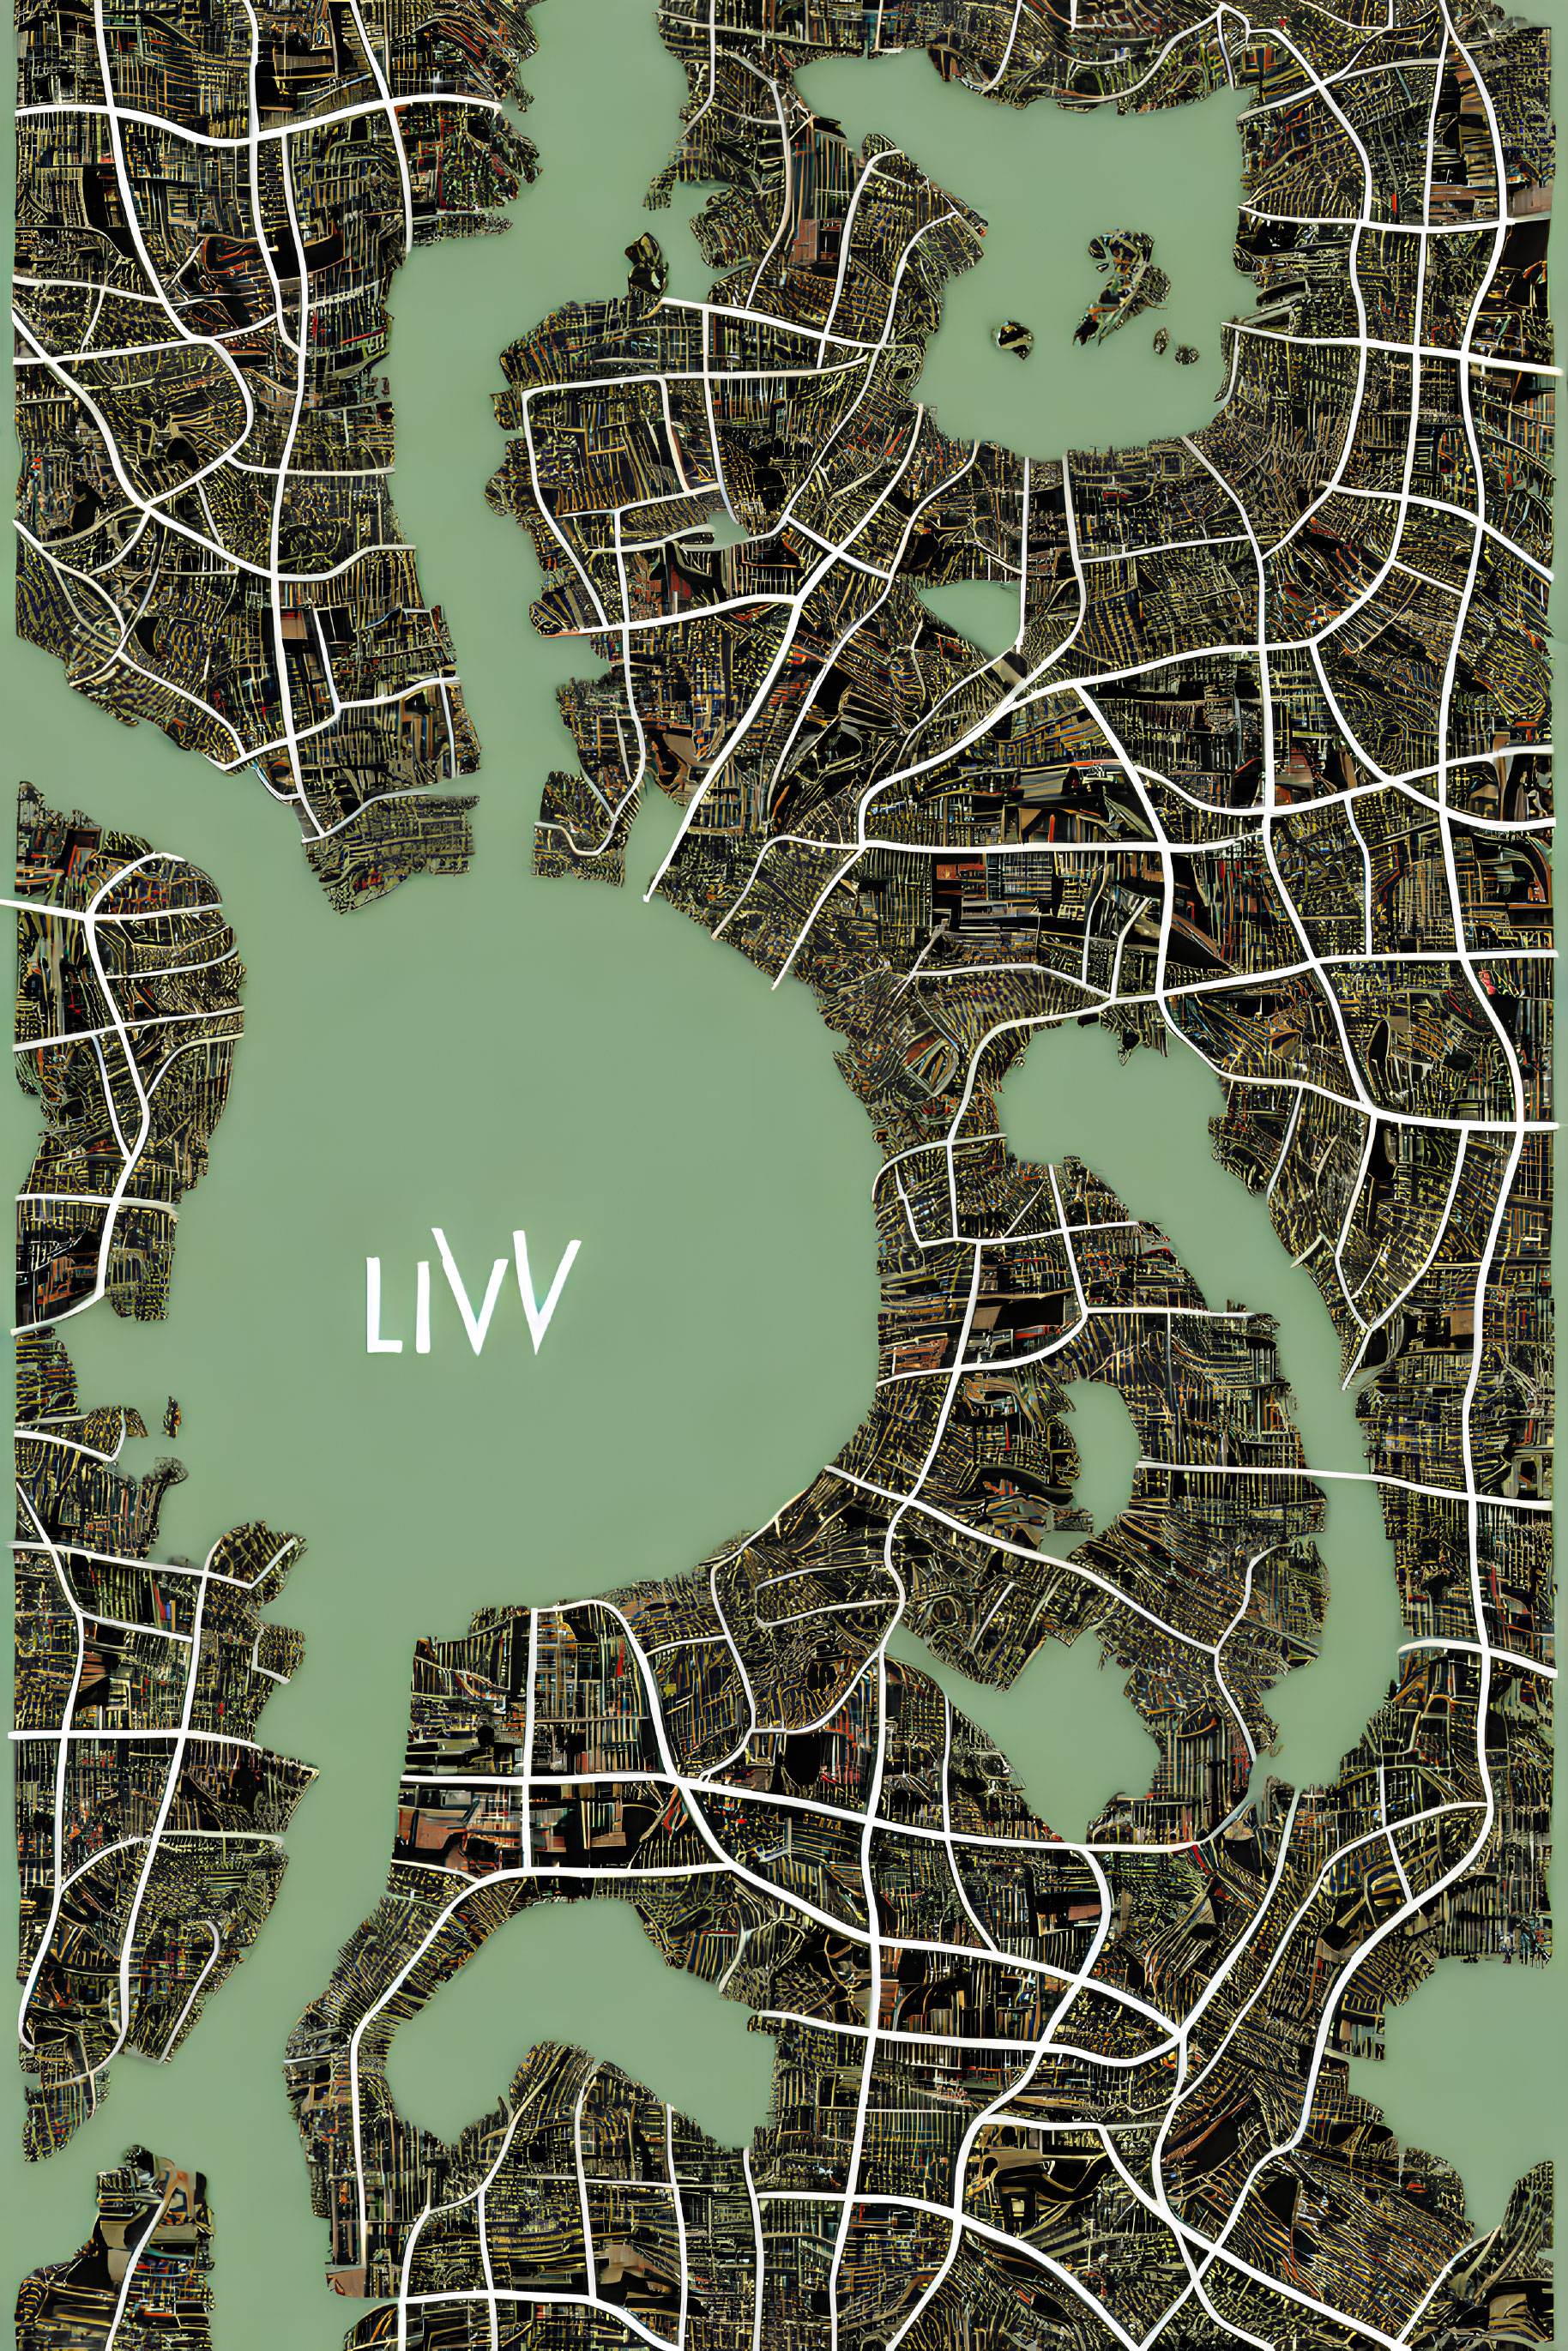 Stylized map with street grid pattern and landmasses, featuring "LIVV" in